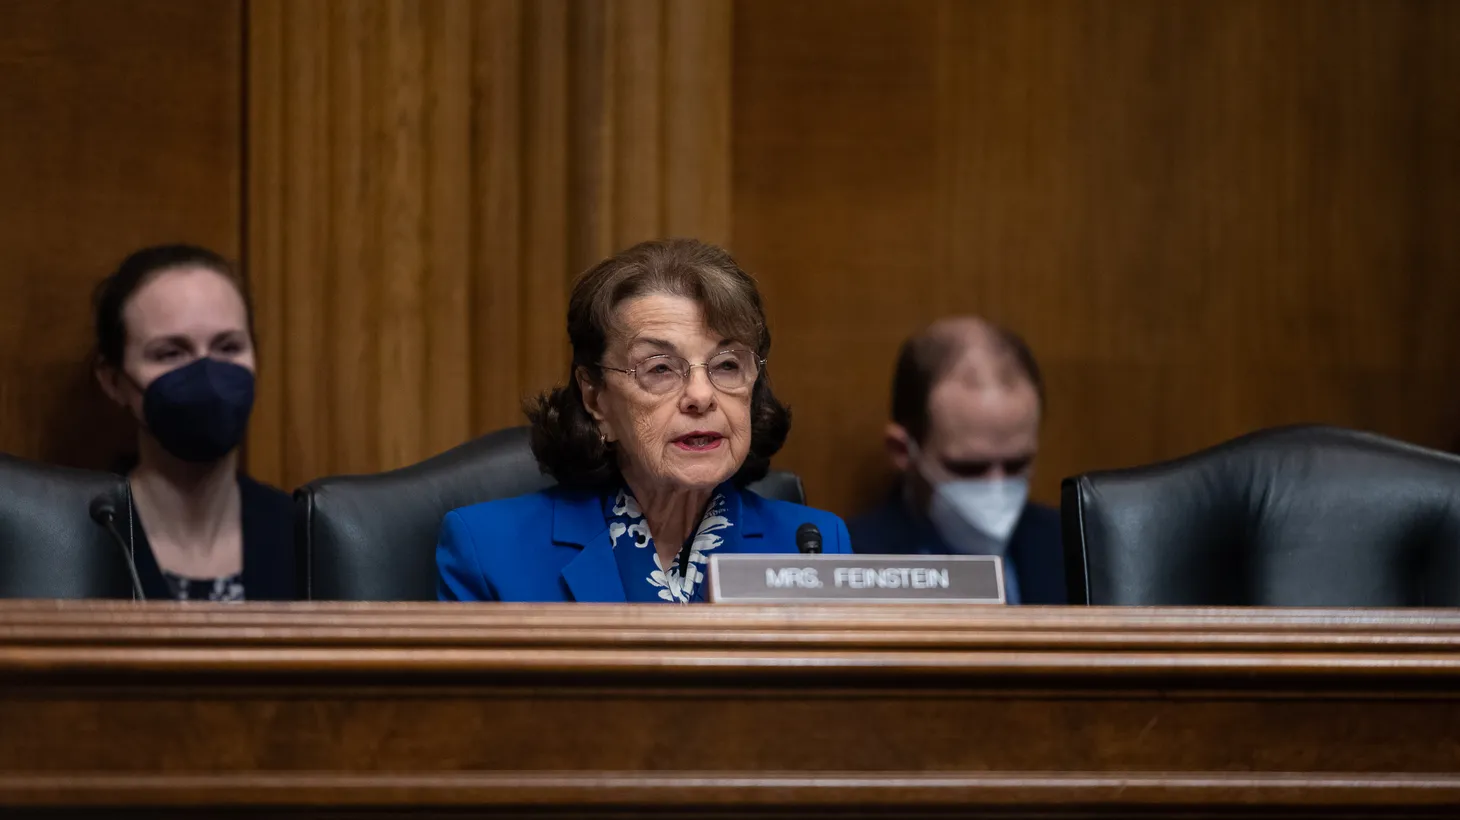 Senator Dianne Feinstein (D-CA) gives remarks during a Senate Judiciary Committee judicial nomination hearing, at the U.S. Capitol, in Washington, D.C., on Tuesday, February 1, 2022.